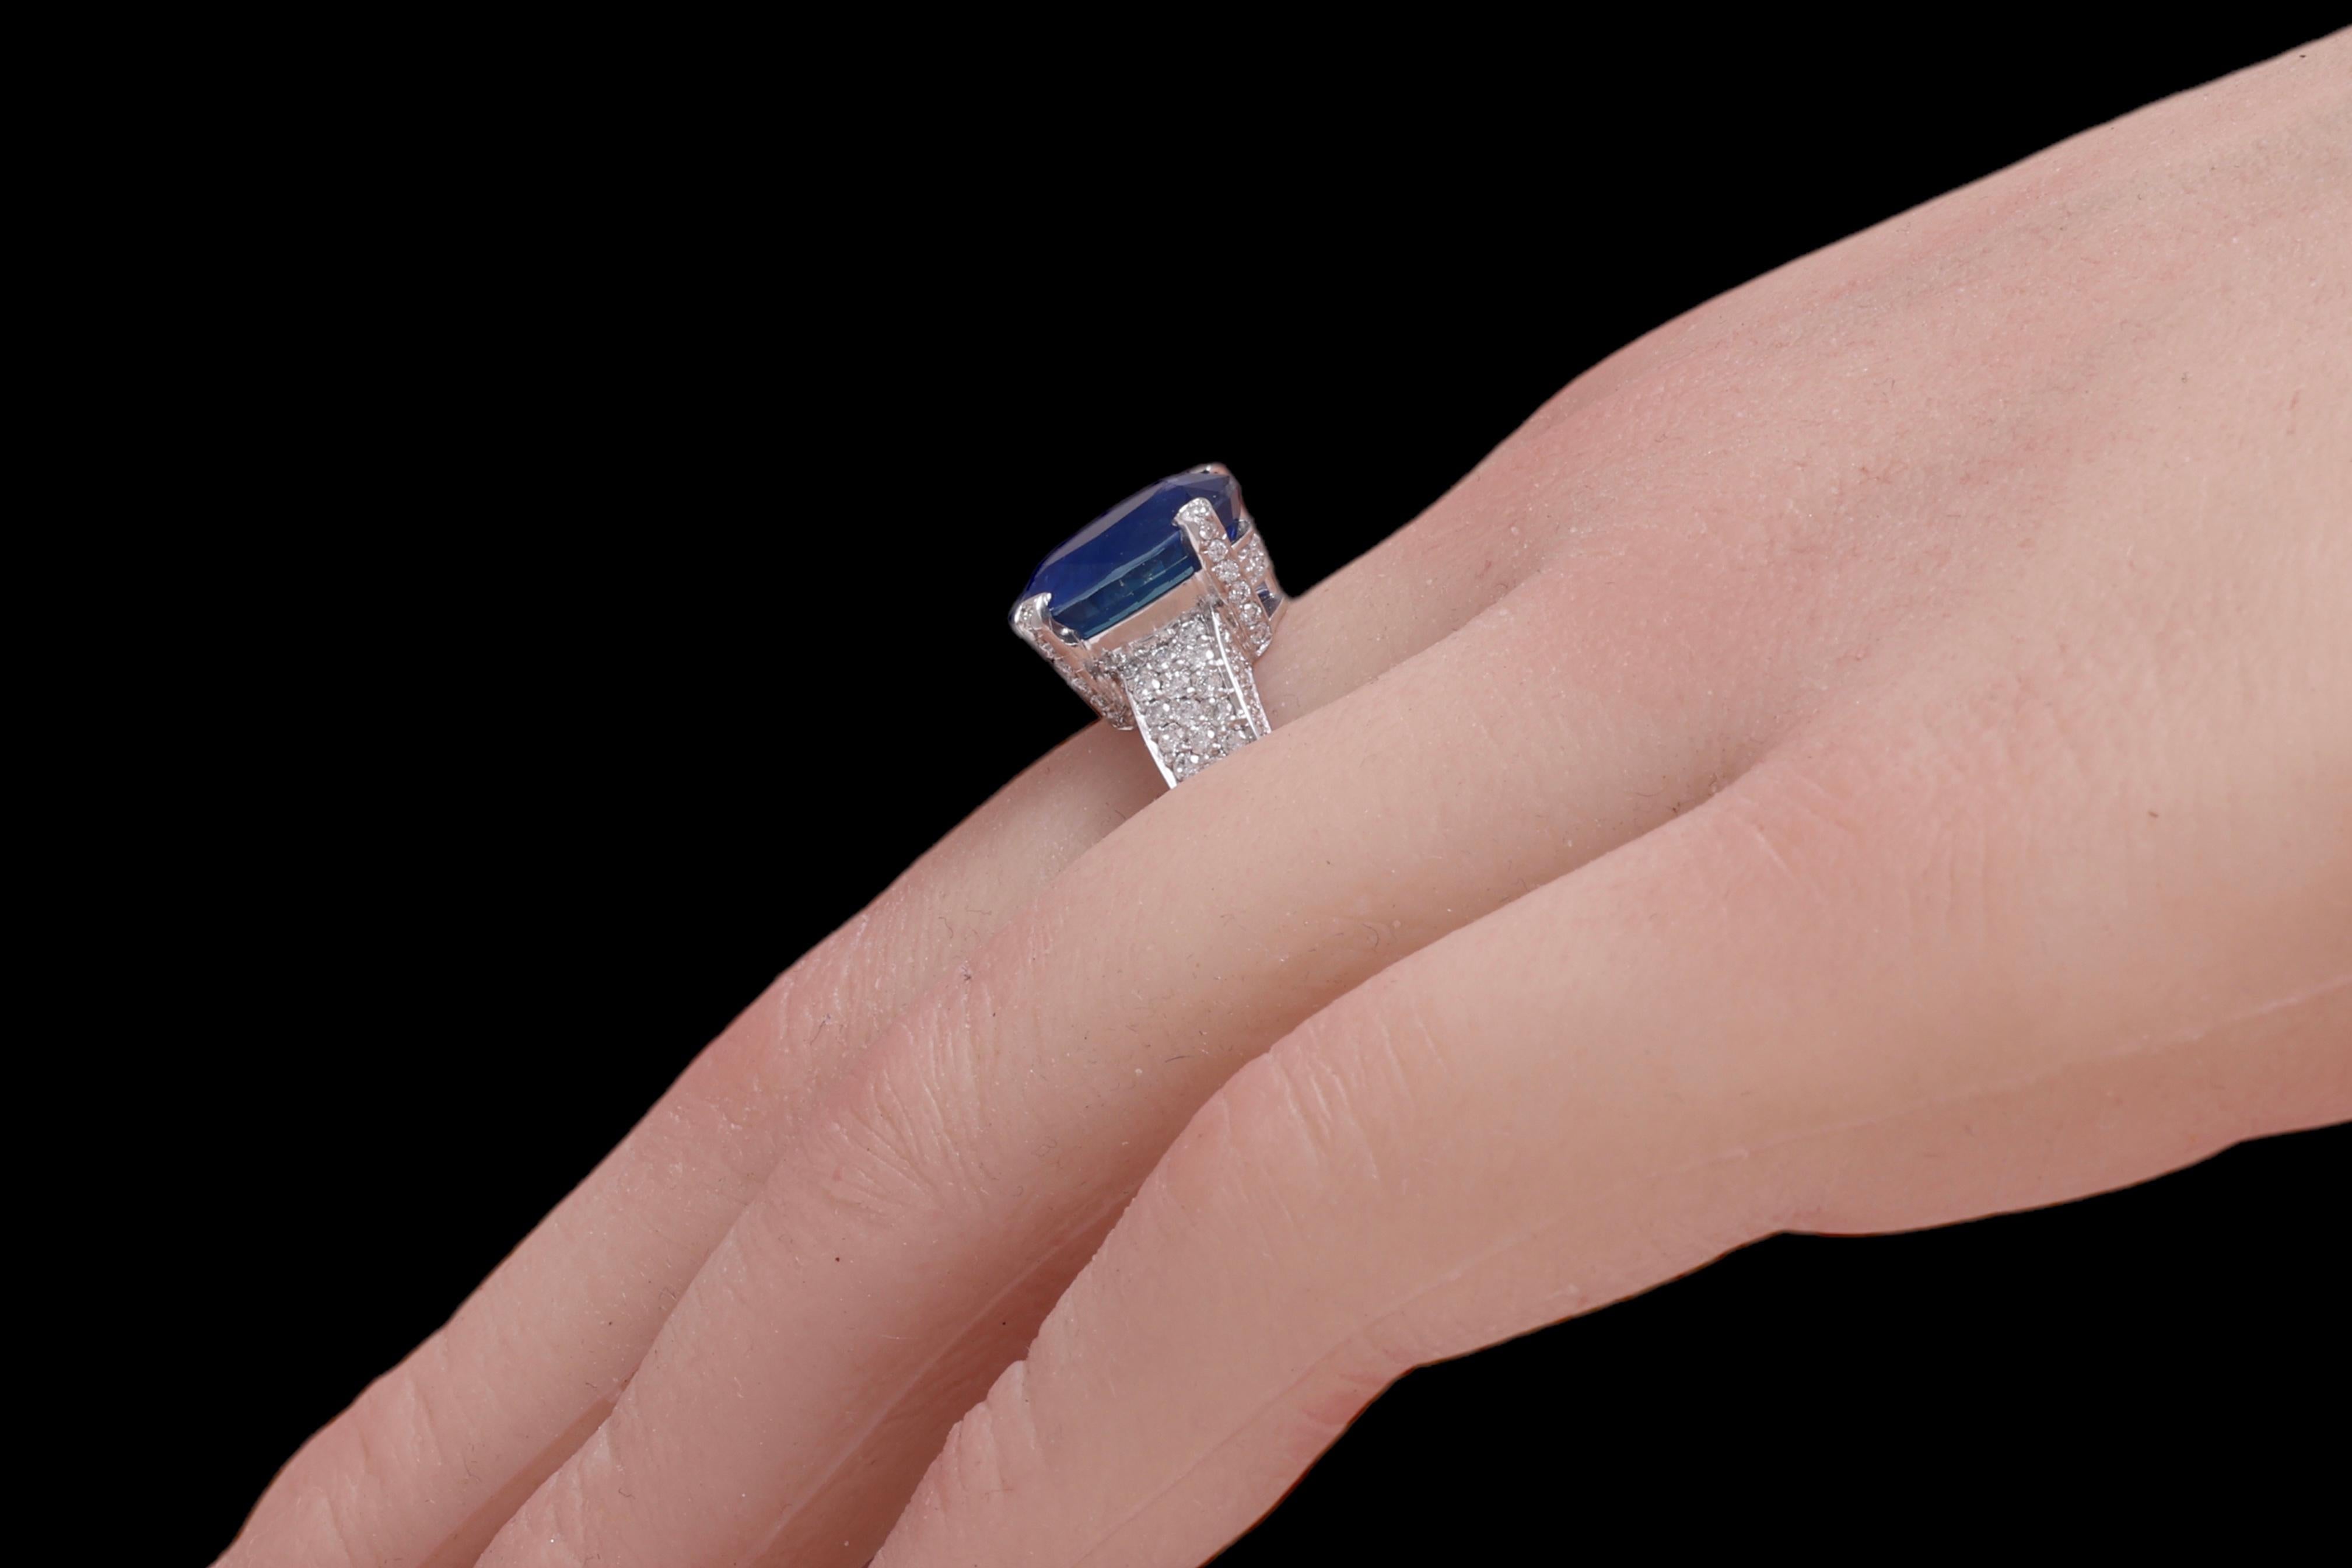  AGL Certified 18kt. White Gold Ring 6.32 ct. Ceylon Sapphire &1.62 ct. Diamonds For Sale 3